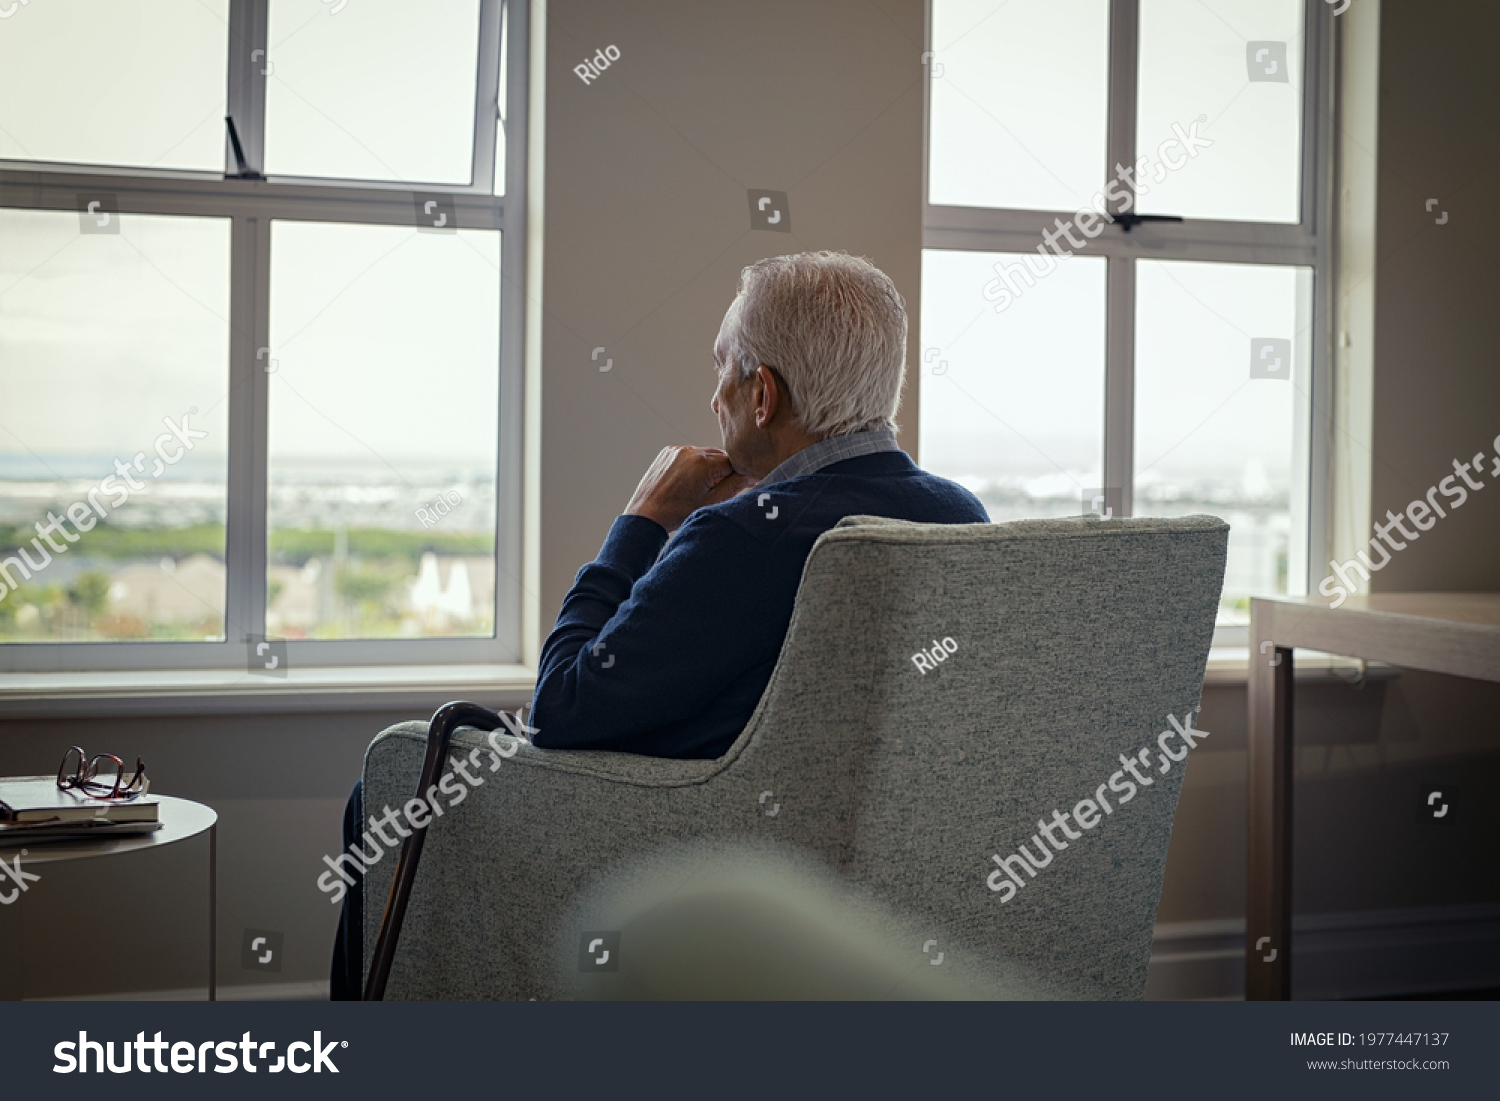 Rear view of senior man sitting on armchair and looking through the window. Lonely old man sitting at home near window during covid19 outbreak. Thoughtful retired man abandoned at nursing home. #1977447137